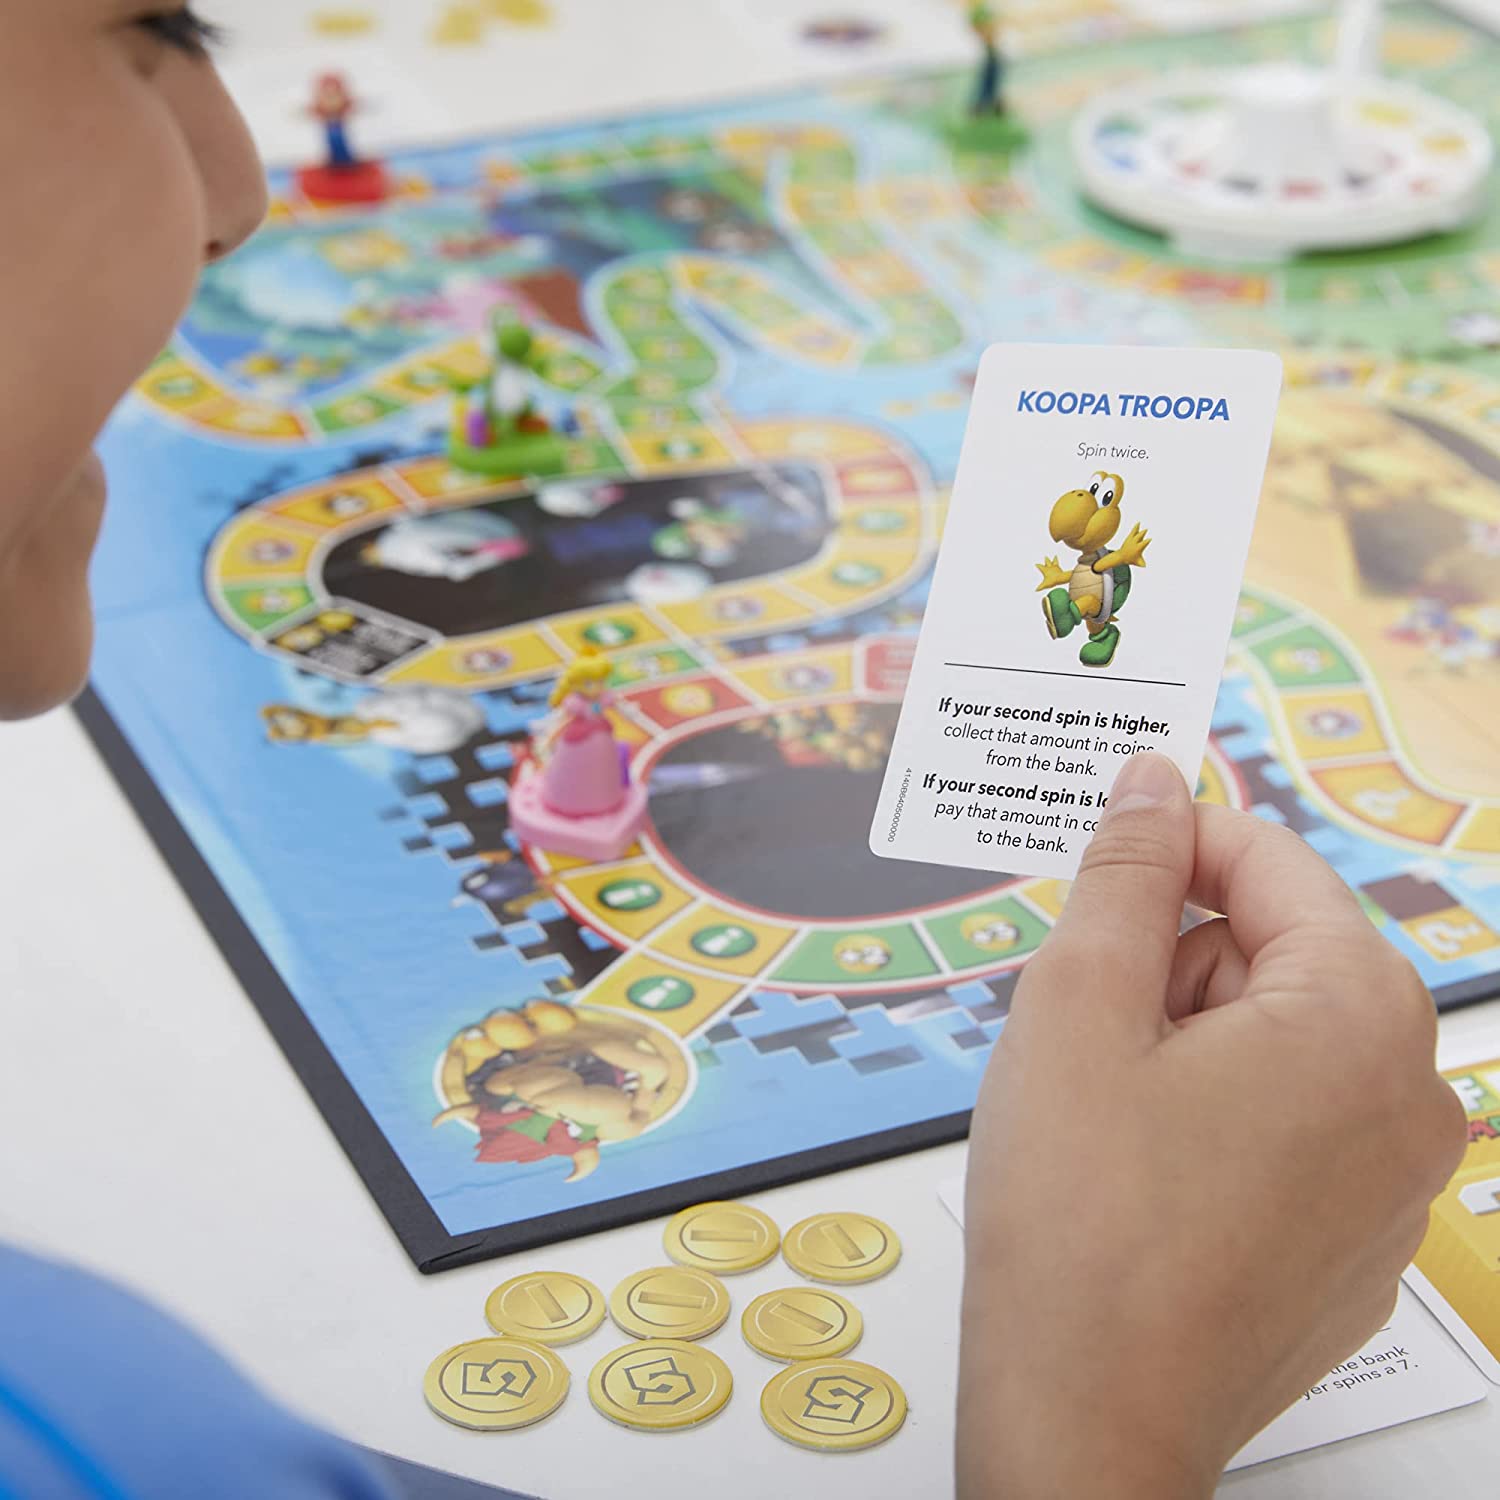 HasbroGaming The Game of Life: Super Mario Edition Board Game